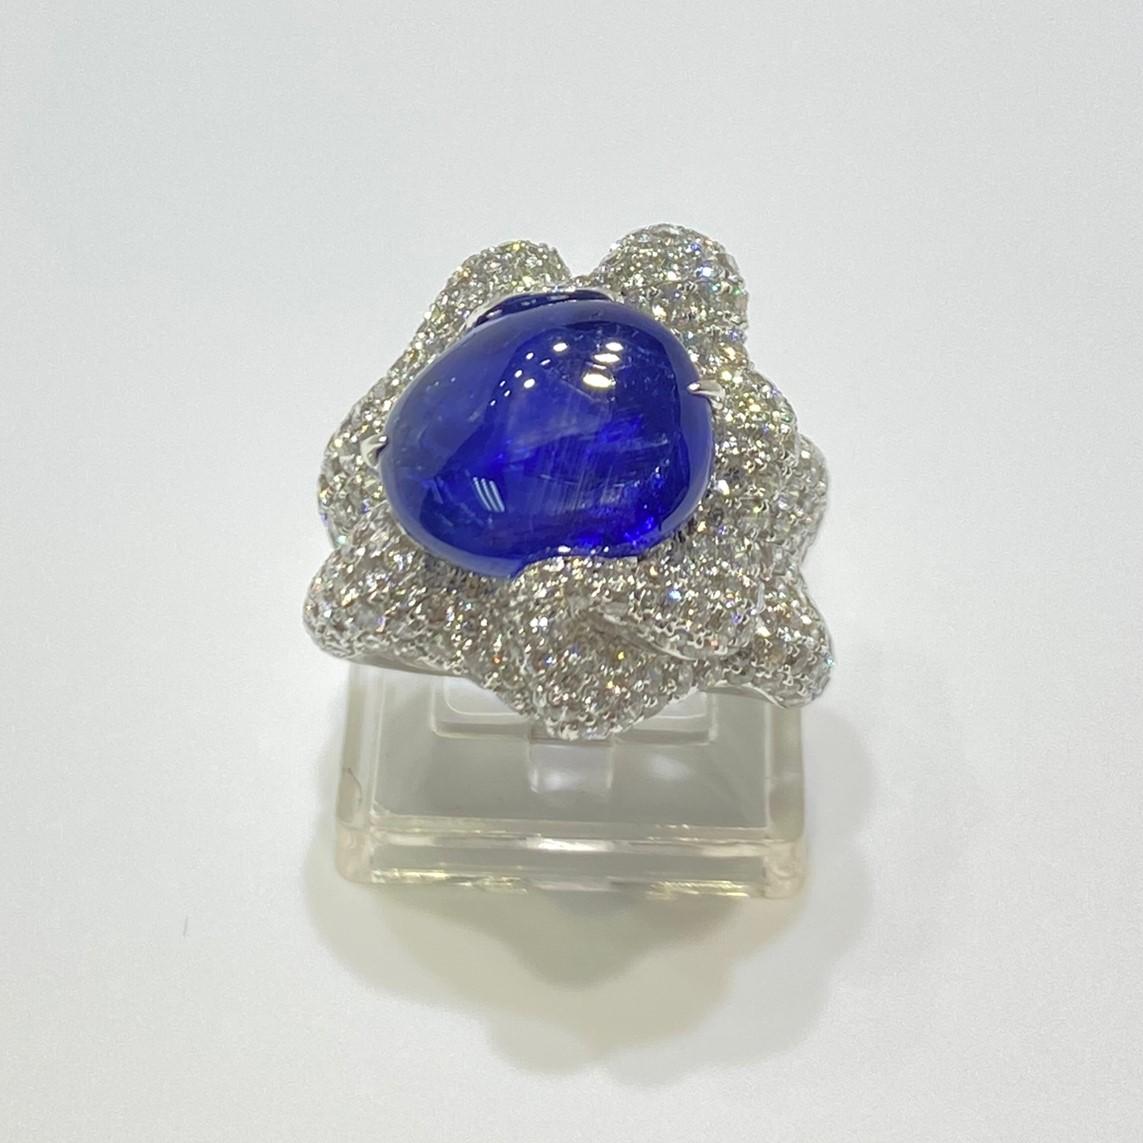 A stunning free form 10.71 carat royal blue Ceylon Sapphire ring, set in white gold ring. The ring showcases excellent craftsmanship. The sapphire have slight inclusions. The mounting is handcrafted based on the free form shape of the sapphire. The